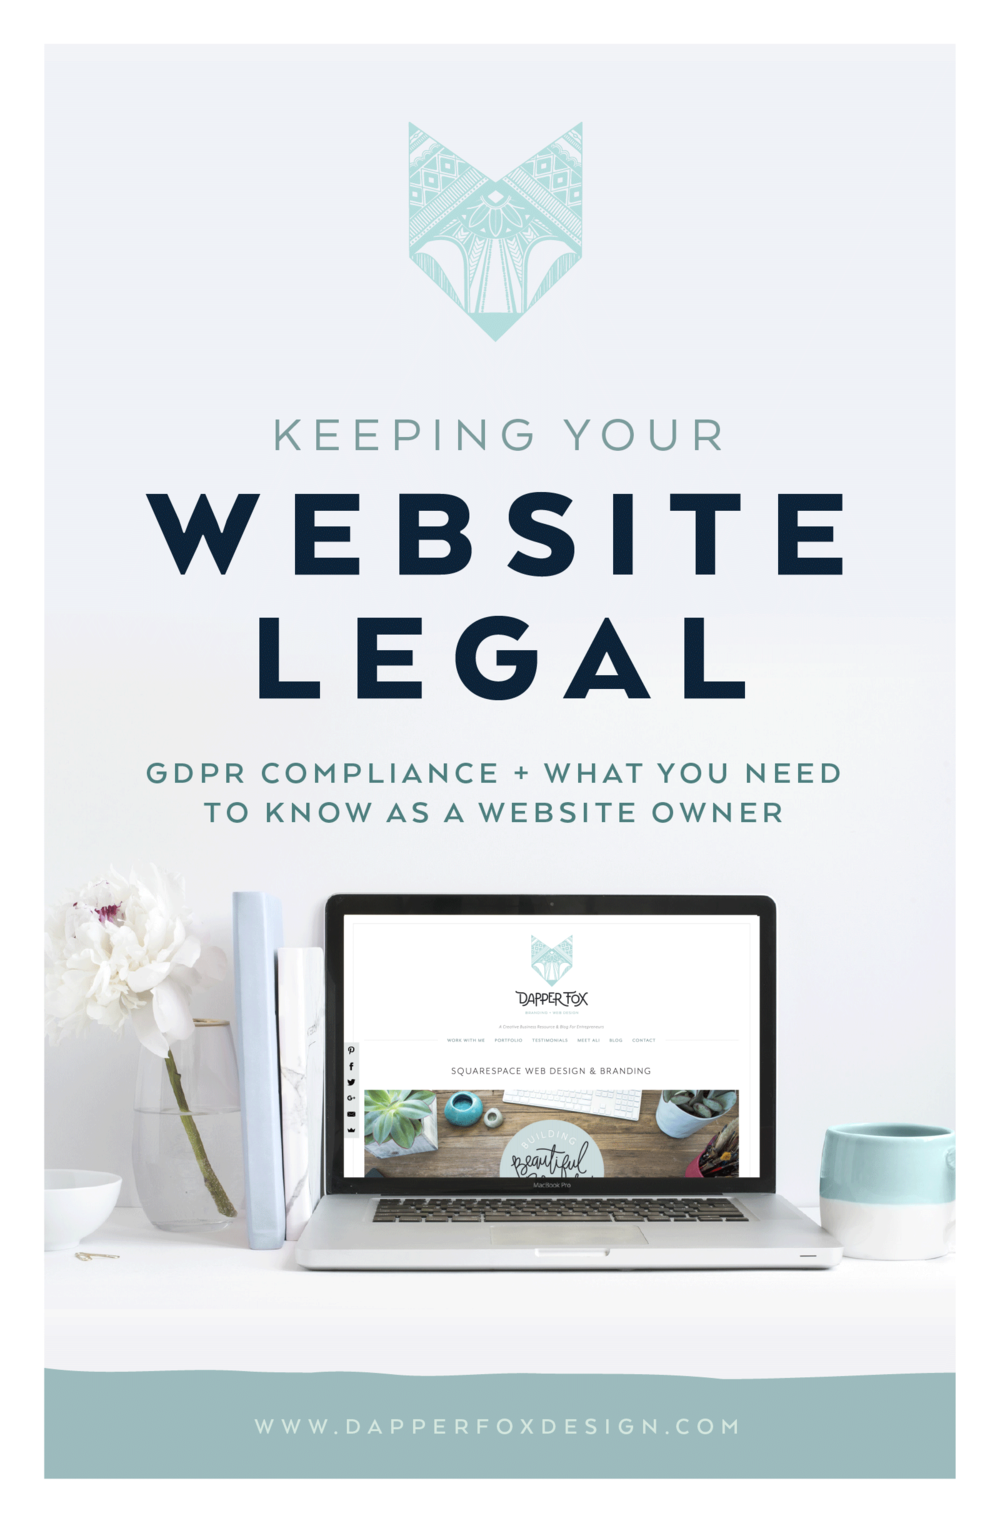 GDPR and How To Keep Your Website Legal